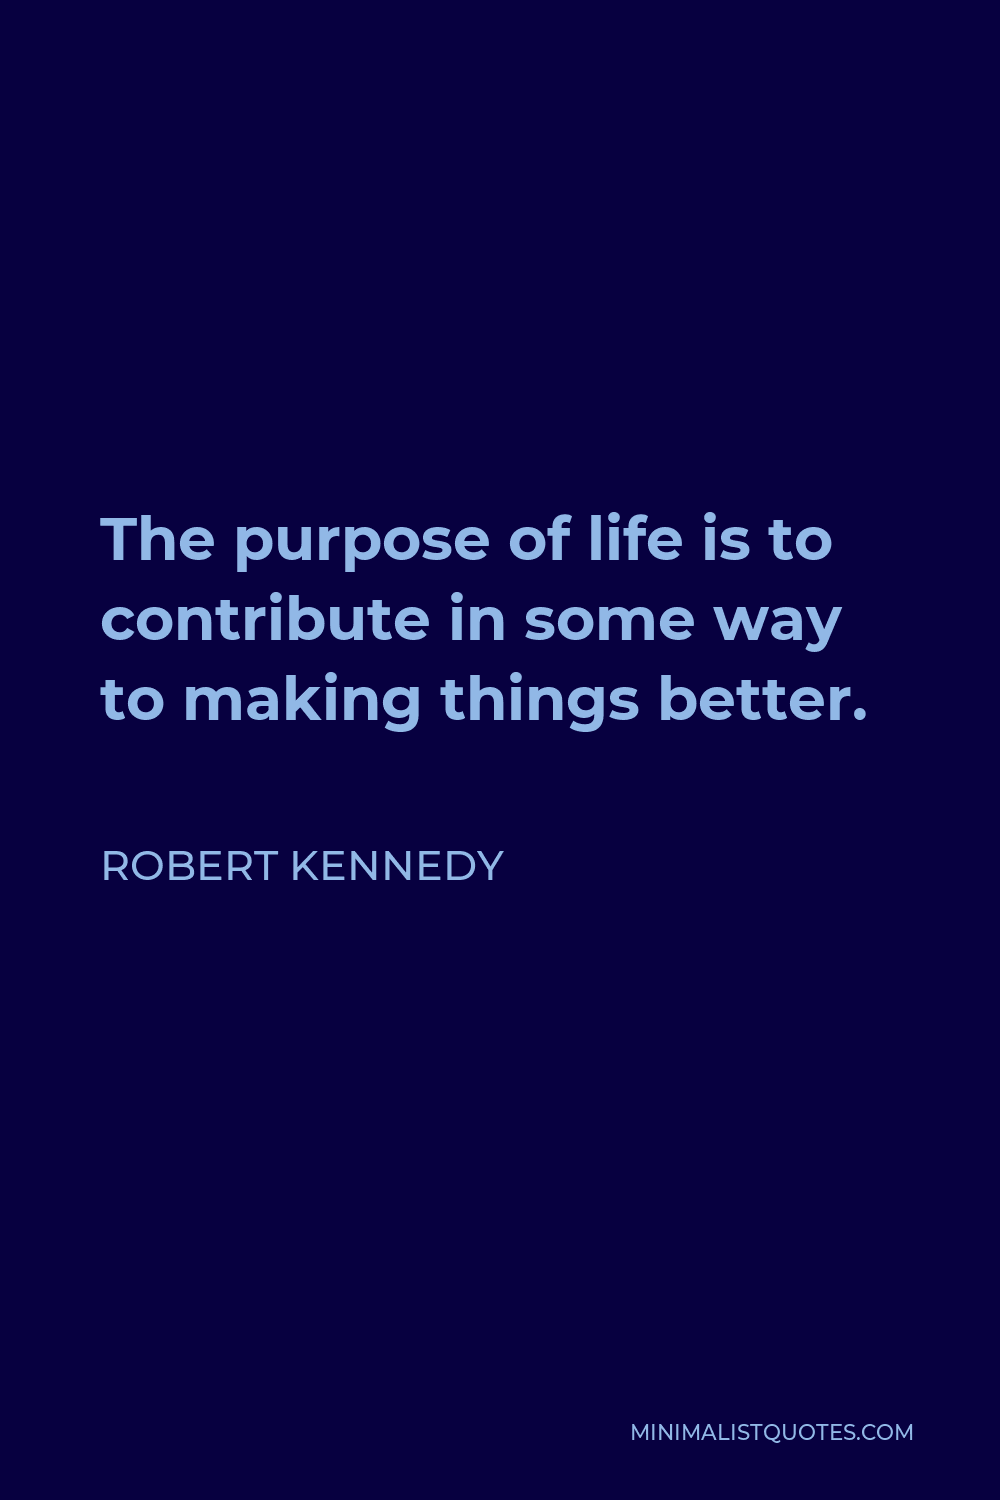 Robert Kennedy Quote - The purpose of life is to contribute in some way to making things better.